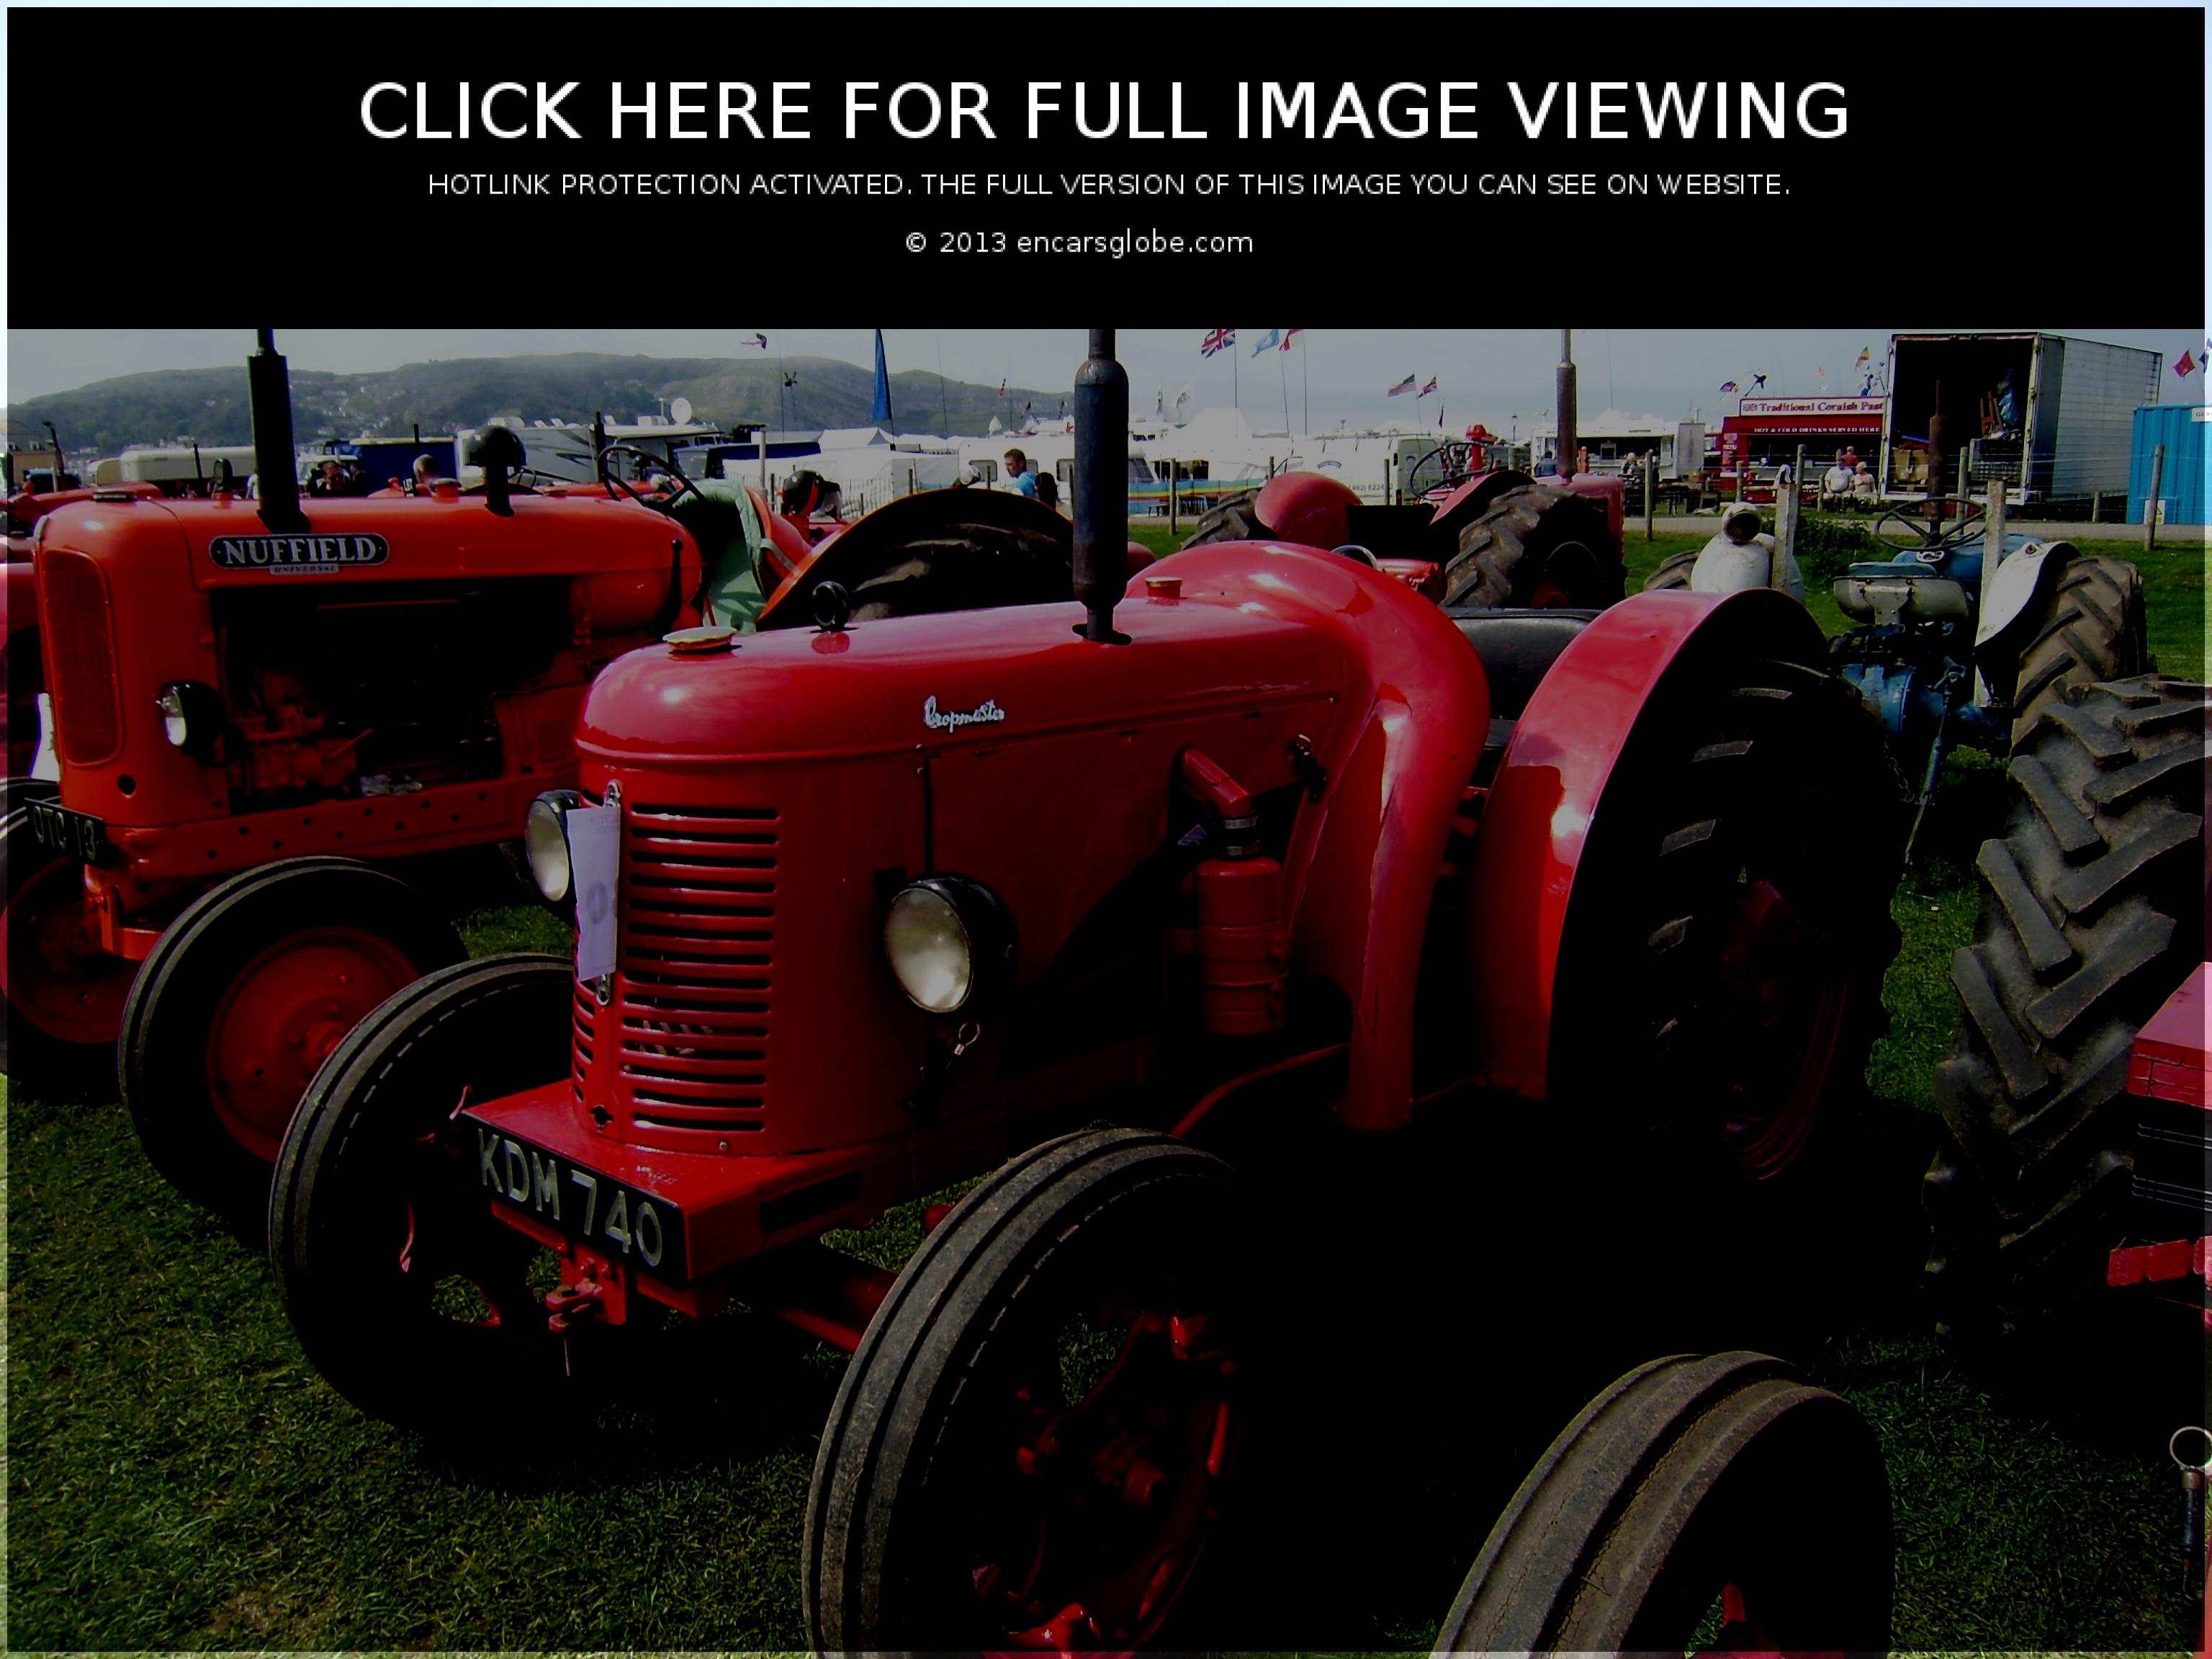 David Brown Tractor Mk2 Photo Gallery: Photo #12 out of 9, Image ...